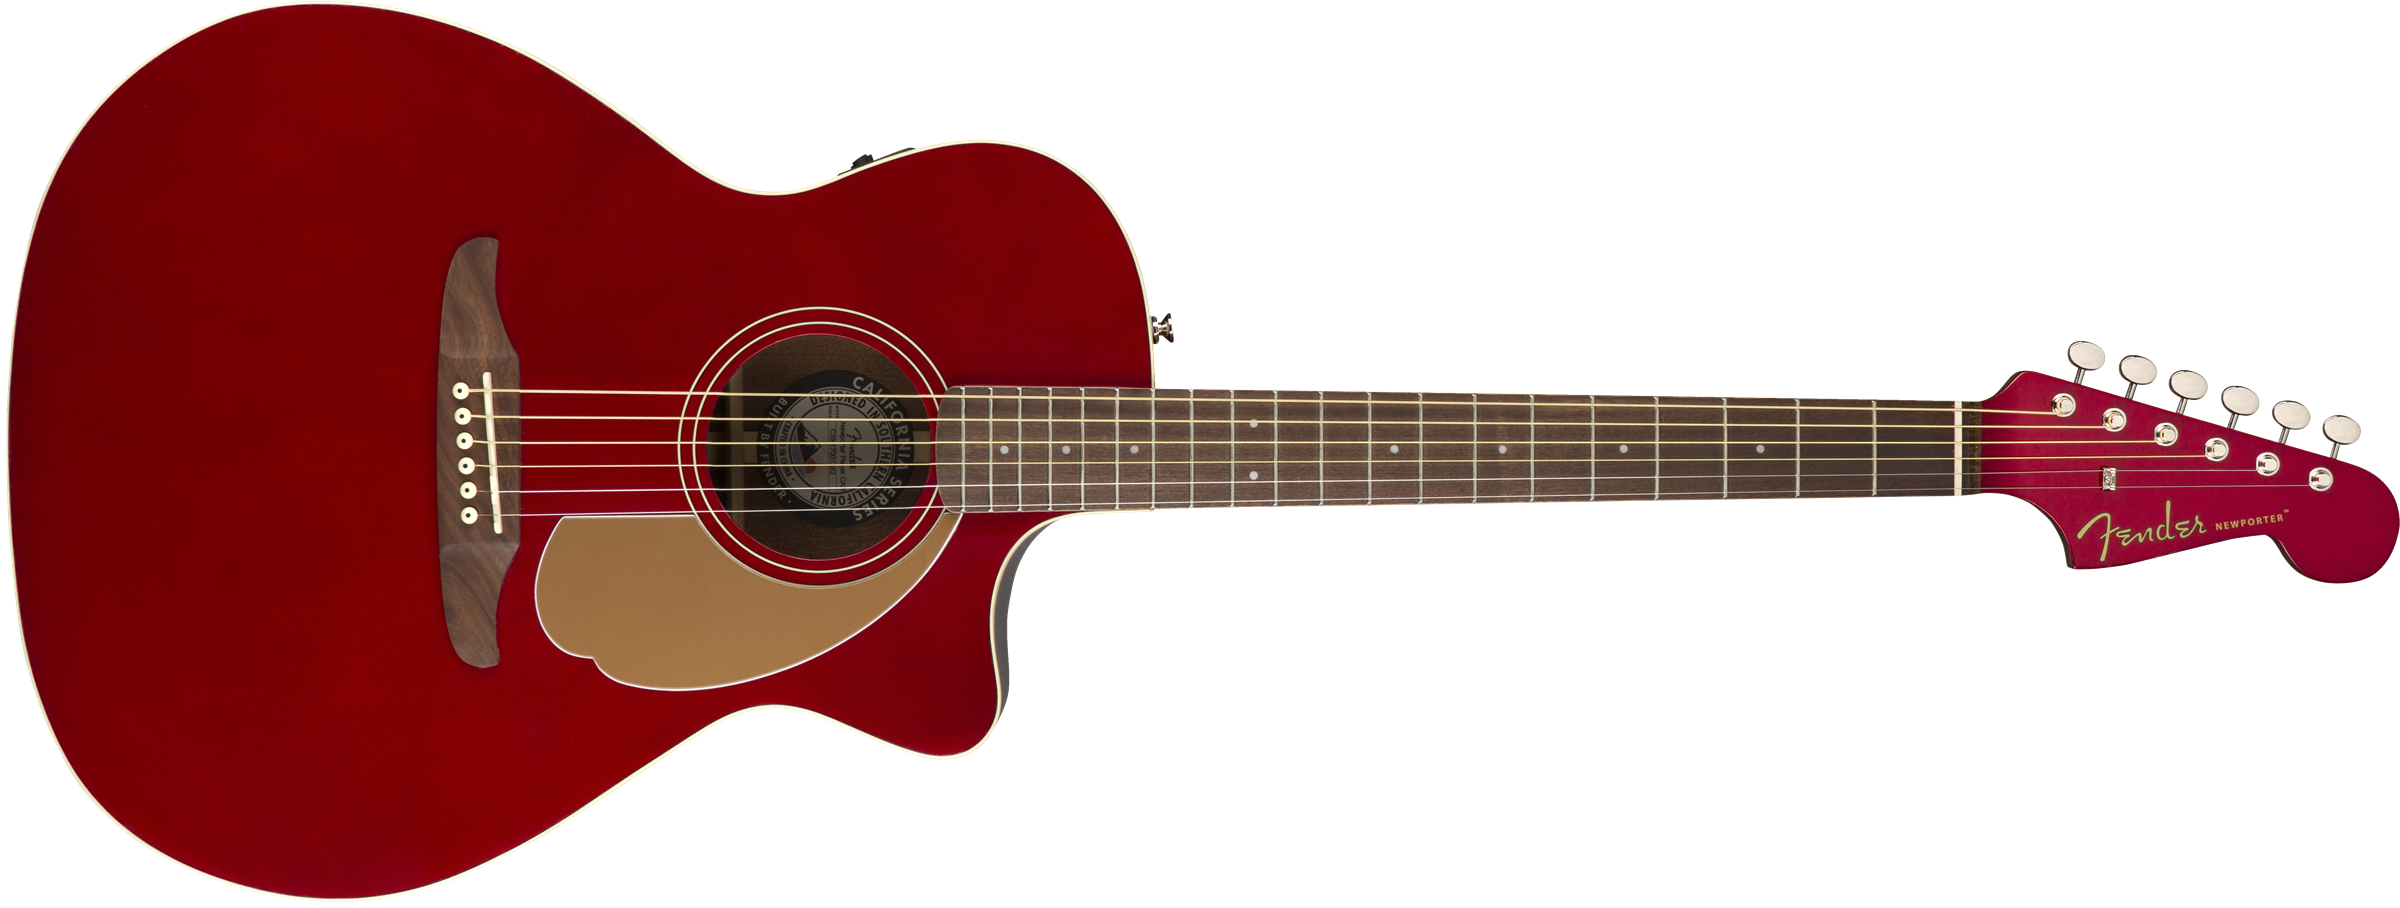 Fender Newporter Player Auditorium Cw Epicea Acajou Wal - Candy Apple Red - Electro acoustic guitar - Variation 2